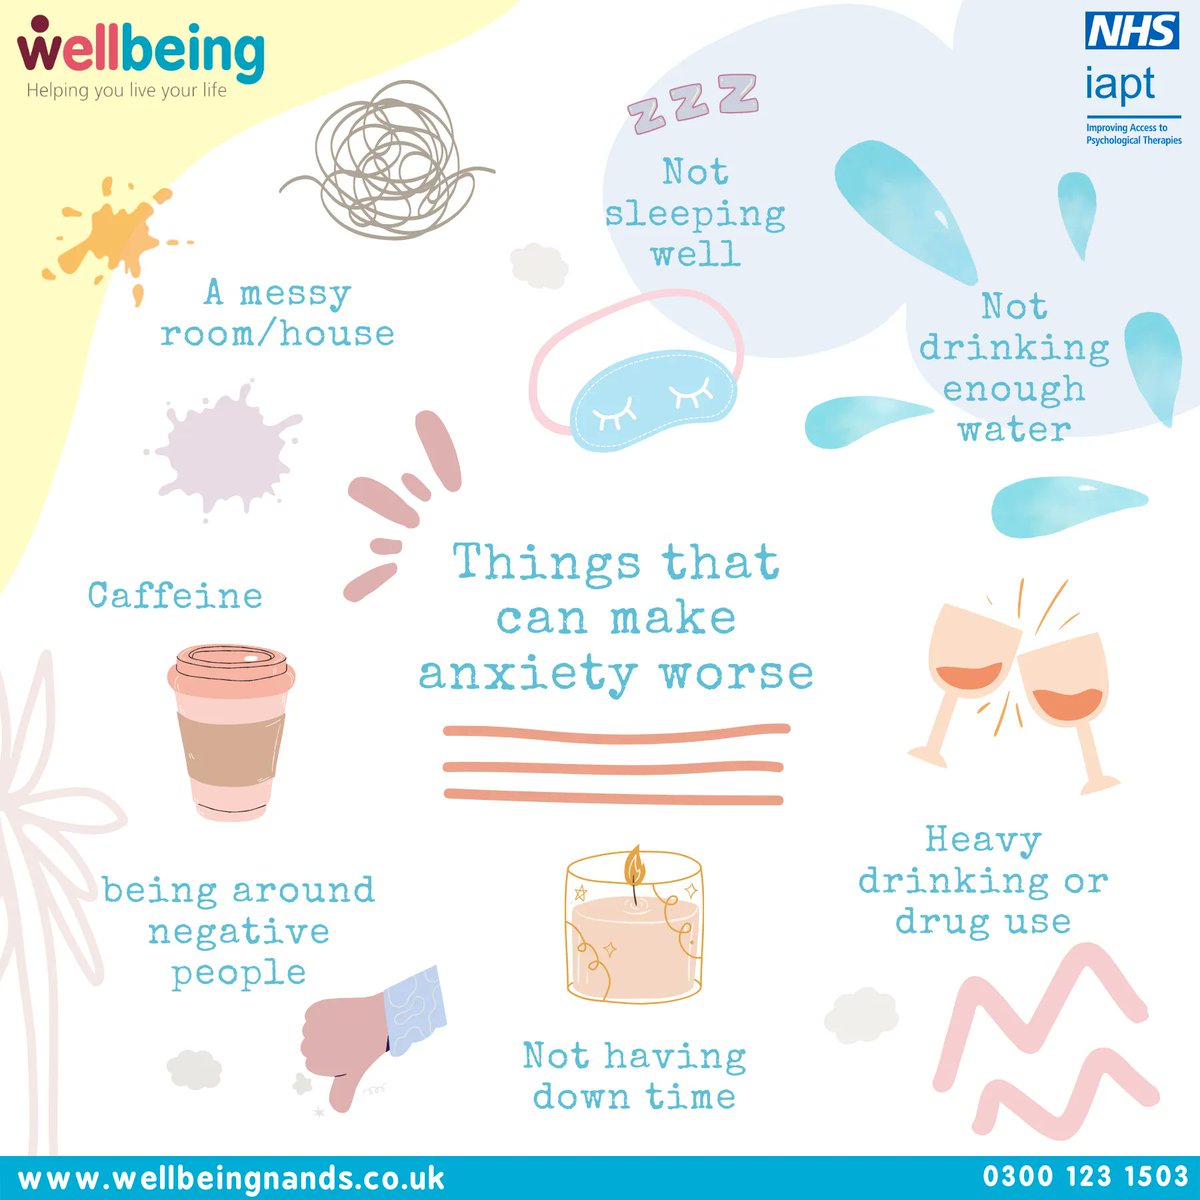 wellbeingnands.co.uk/norfolk/course…⠀ ⠀⠀ Please self refer, give us a ring or find out more on our website! wellbeingnands.co.uk/norfolk/ ⠀⠀ #wellbeing #nhs #anxiety #mentalhealth #support #workshop